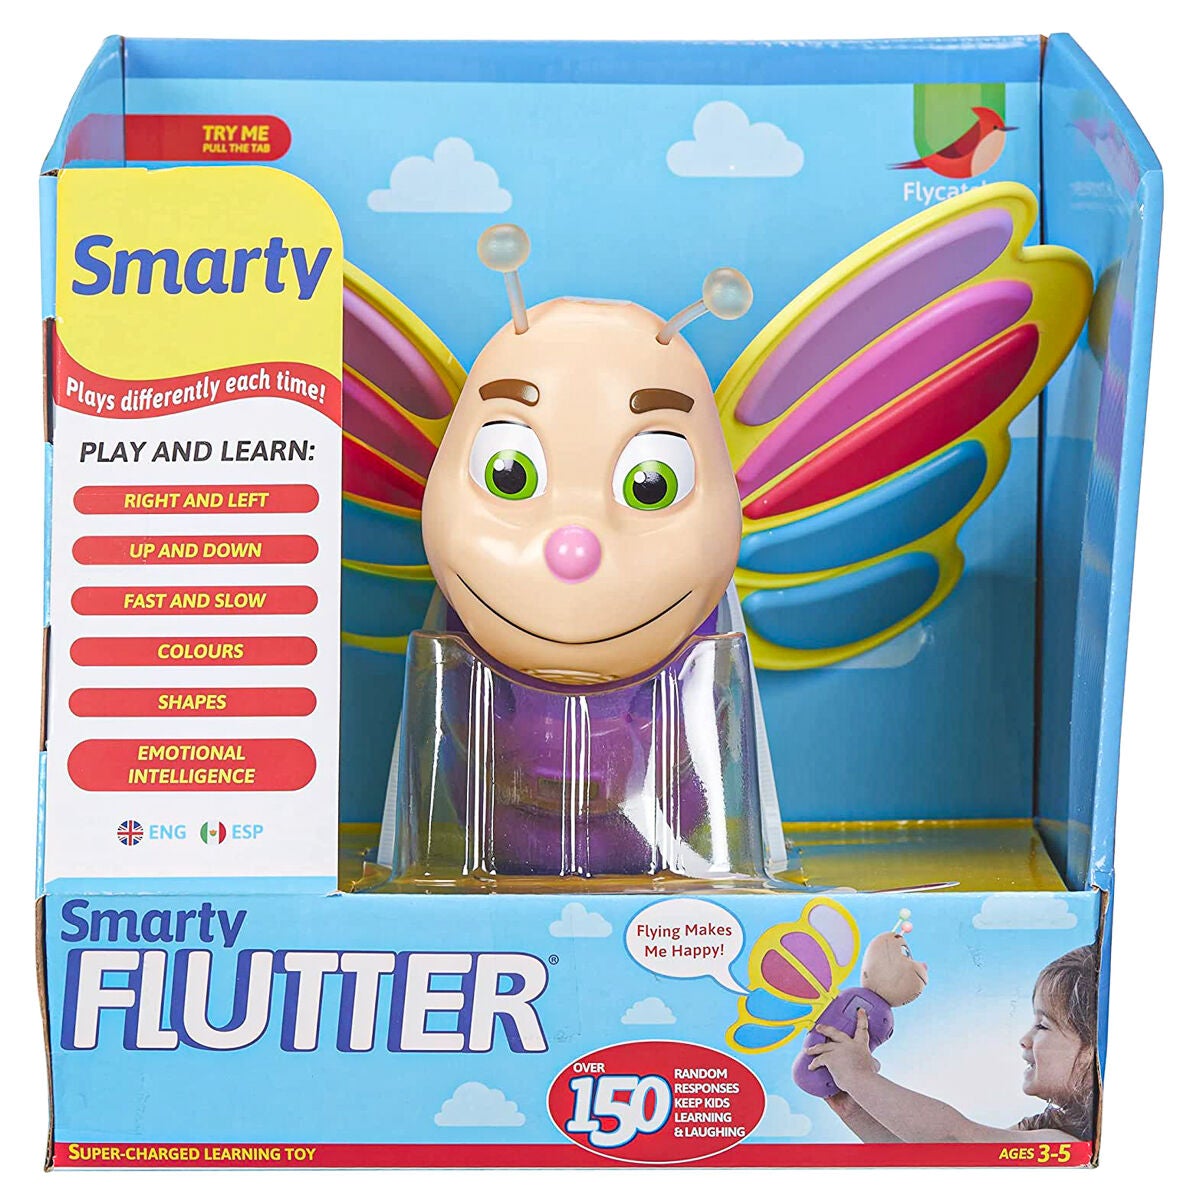 Smarty Flutter Aeroplane Super Charged Interactive Learning Toy